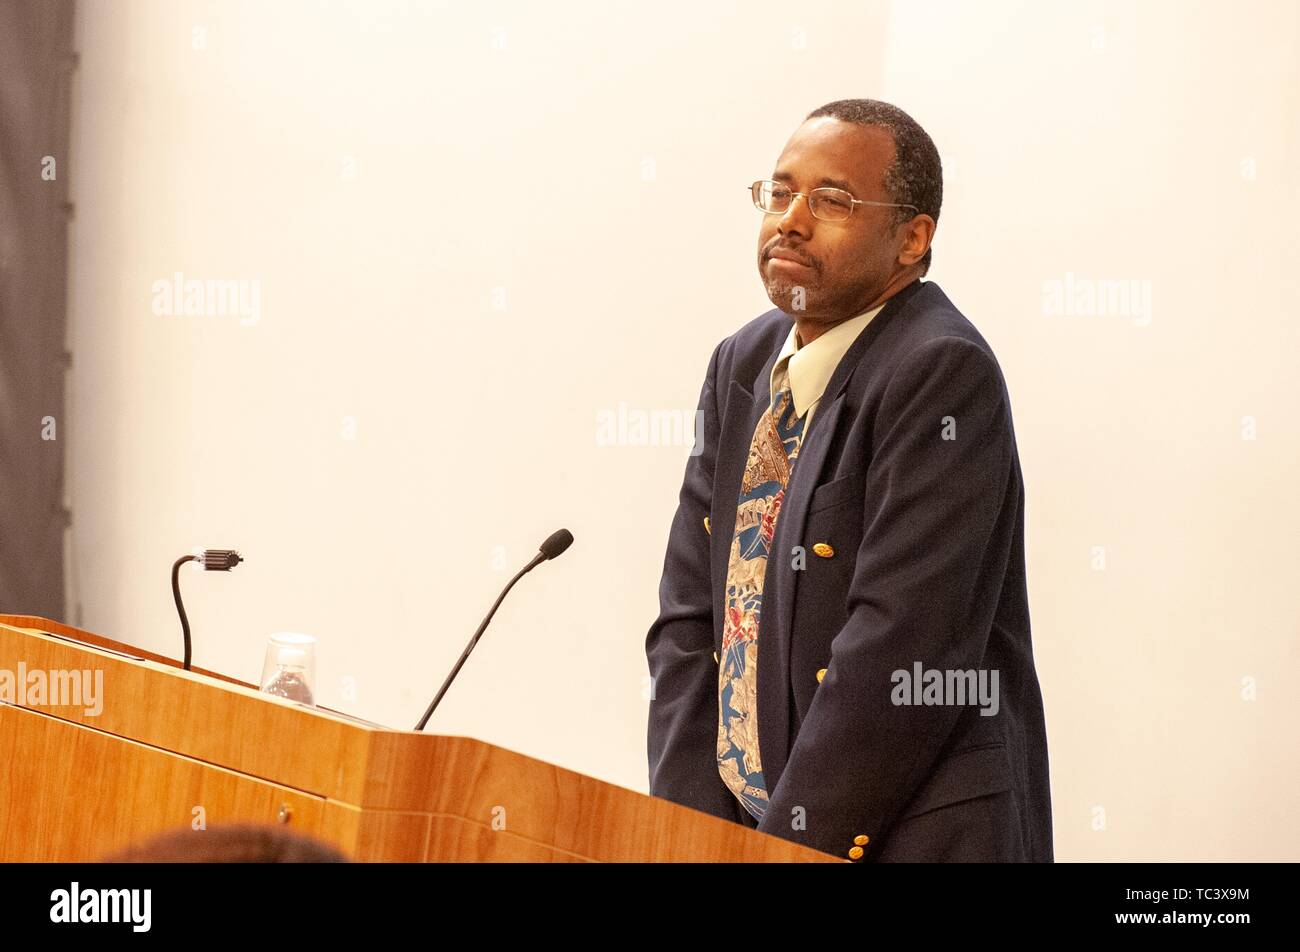 Three-quarter profile view of keynote speaker Ben Carson standing at a podium during the Minority Pre-Health Conference at the Johns Hopkins University, Baltimore, Maryland, February 29, 2008. From the Homewood Photography Collection. () Stock Photo